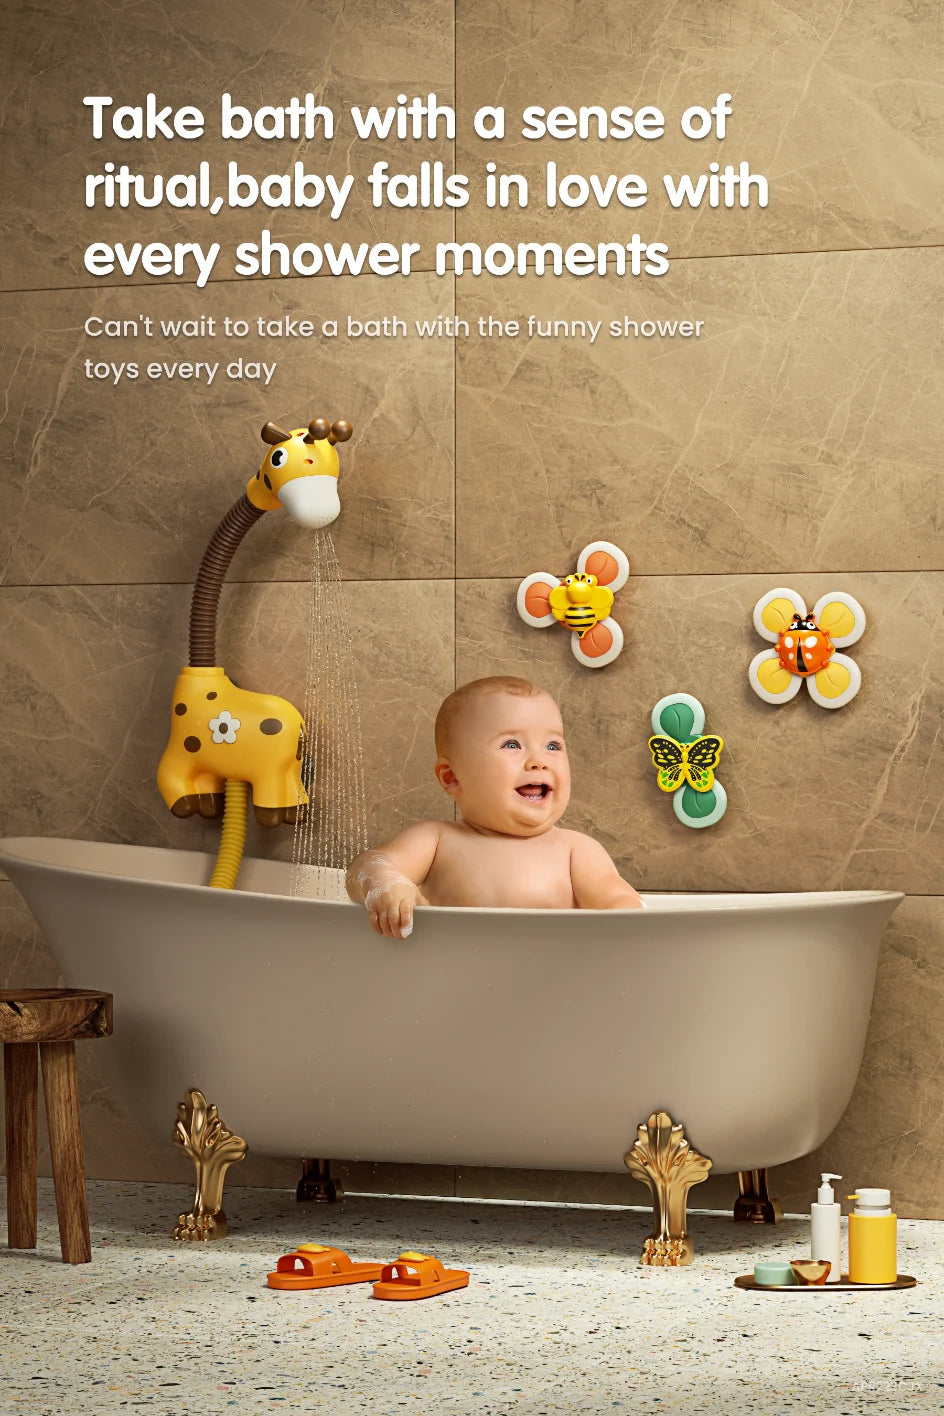 Baby with wind up bath toy take bath with a sense of ritual